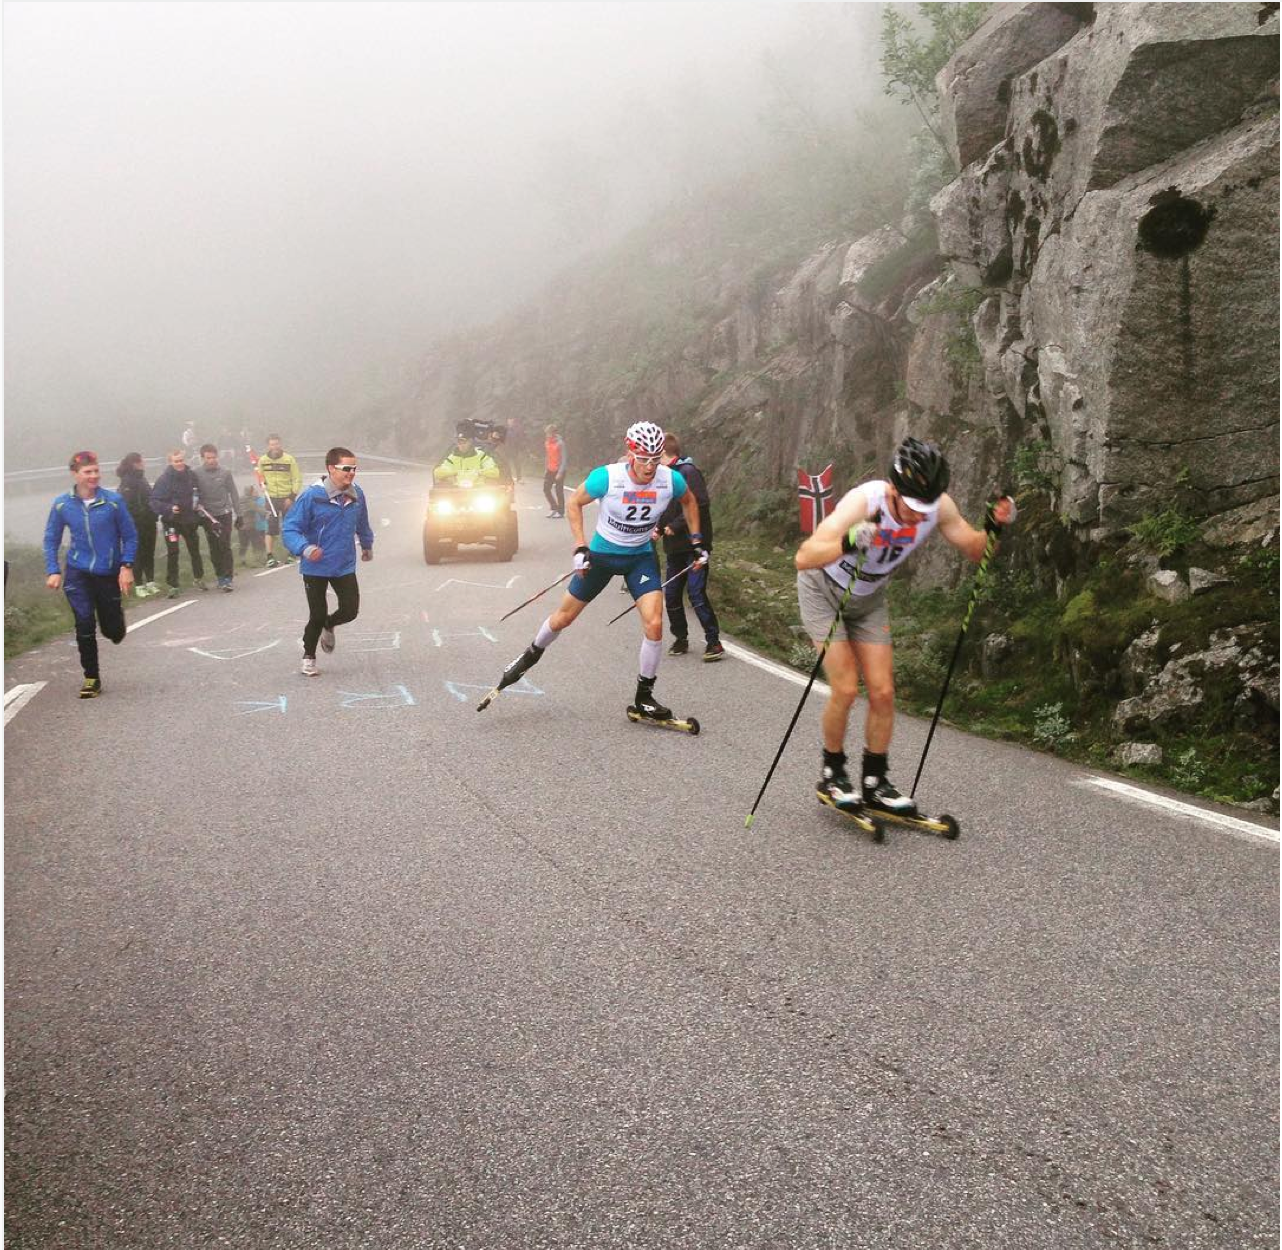 Matti Heikkinen of Finland drops Russia's Alexander Legkov at the top of the Lysebotn Op hill climb, a seven kilometer rollerski race which kicked off the Blink festival in Norway on Thursday. (Photo: Blinkfestivalen/Instagram)